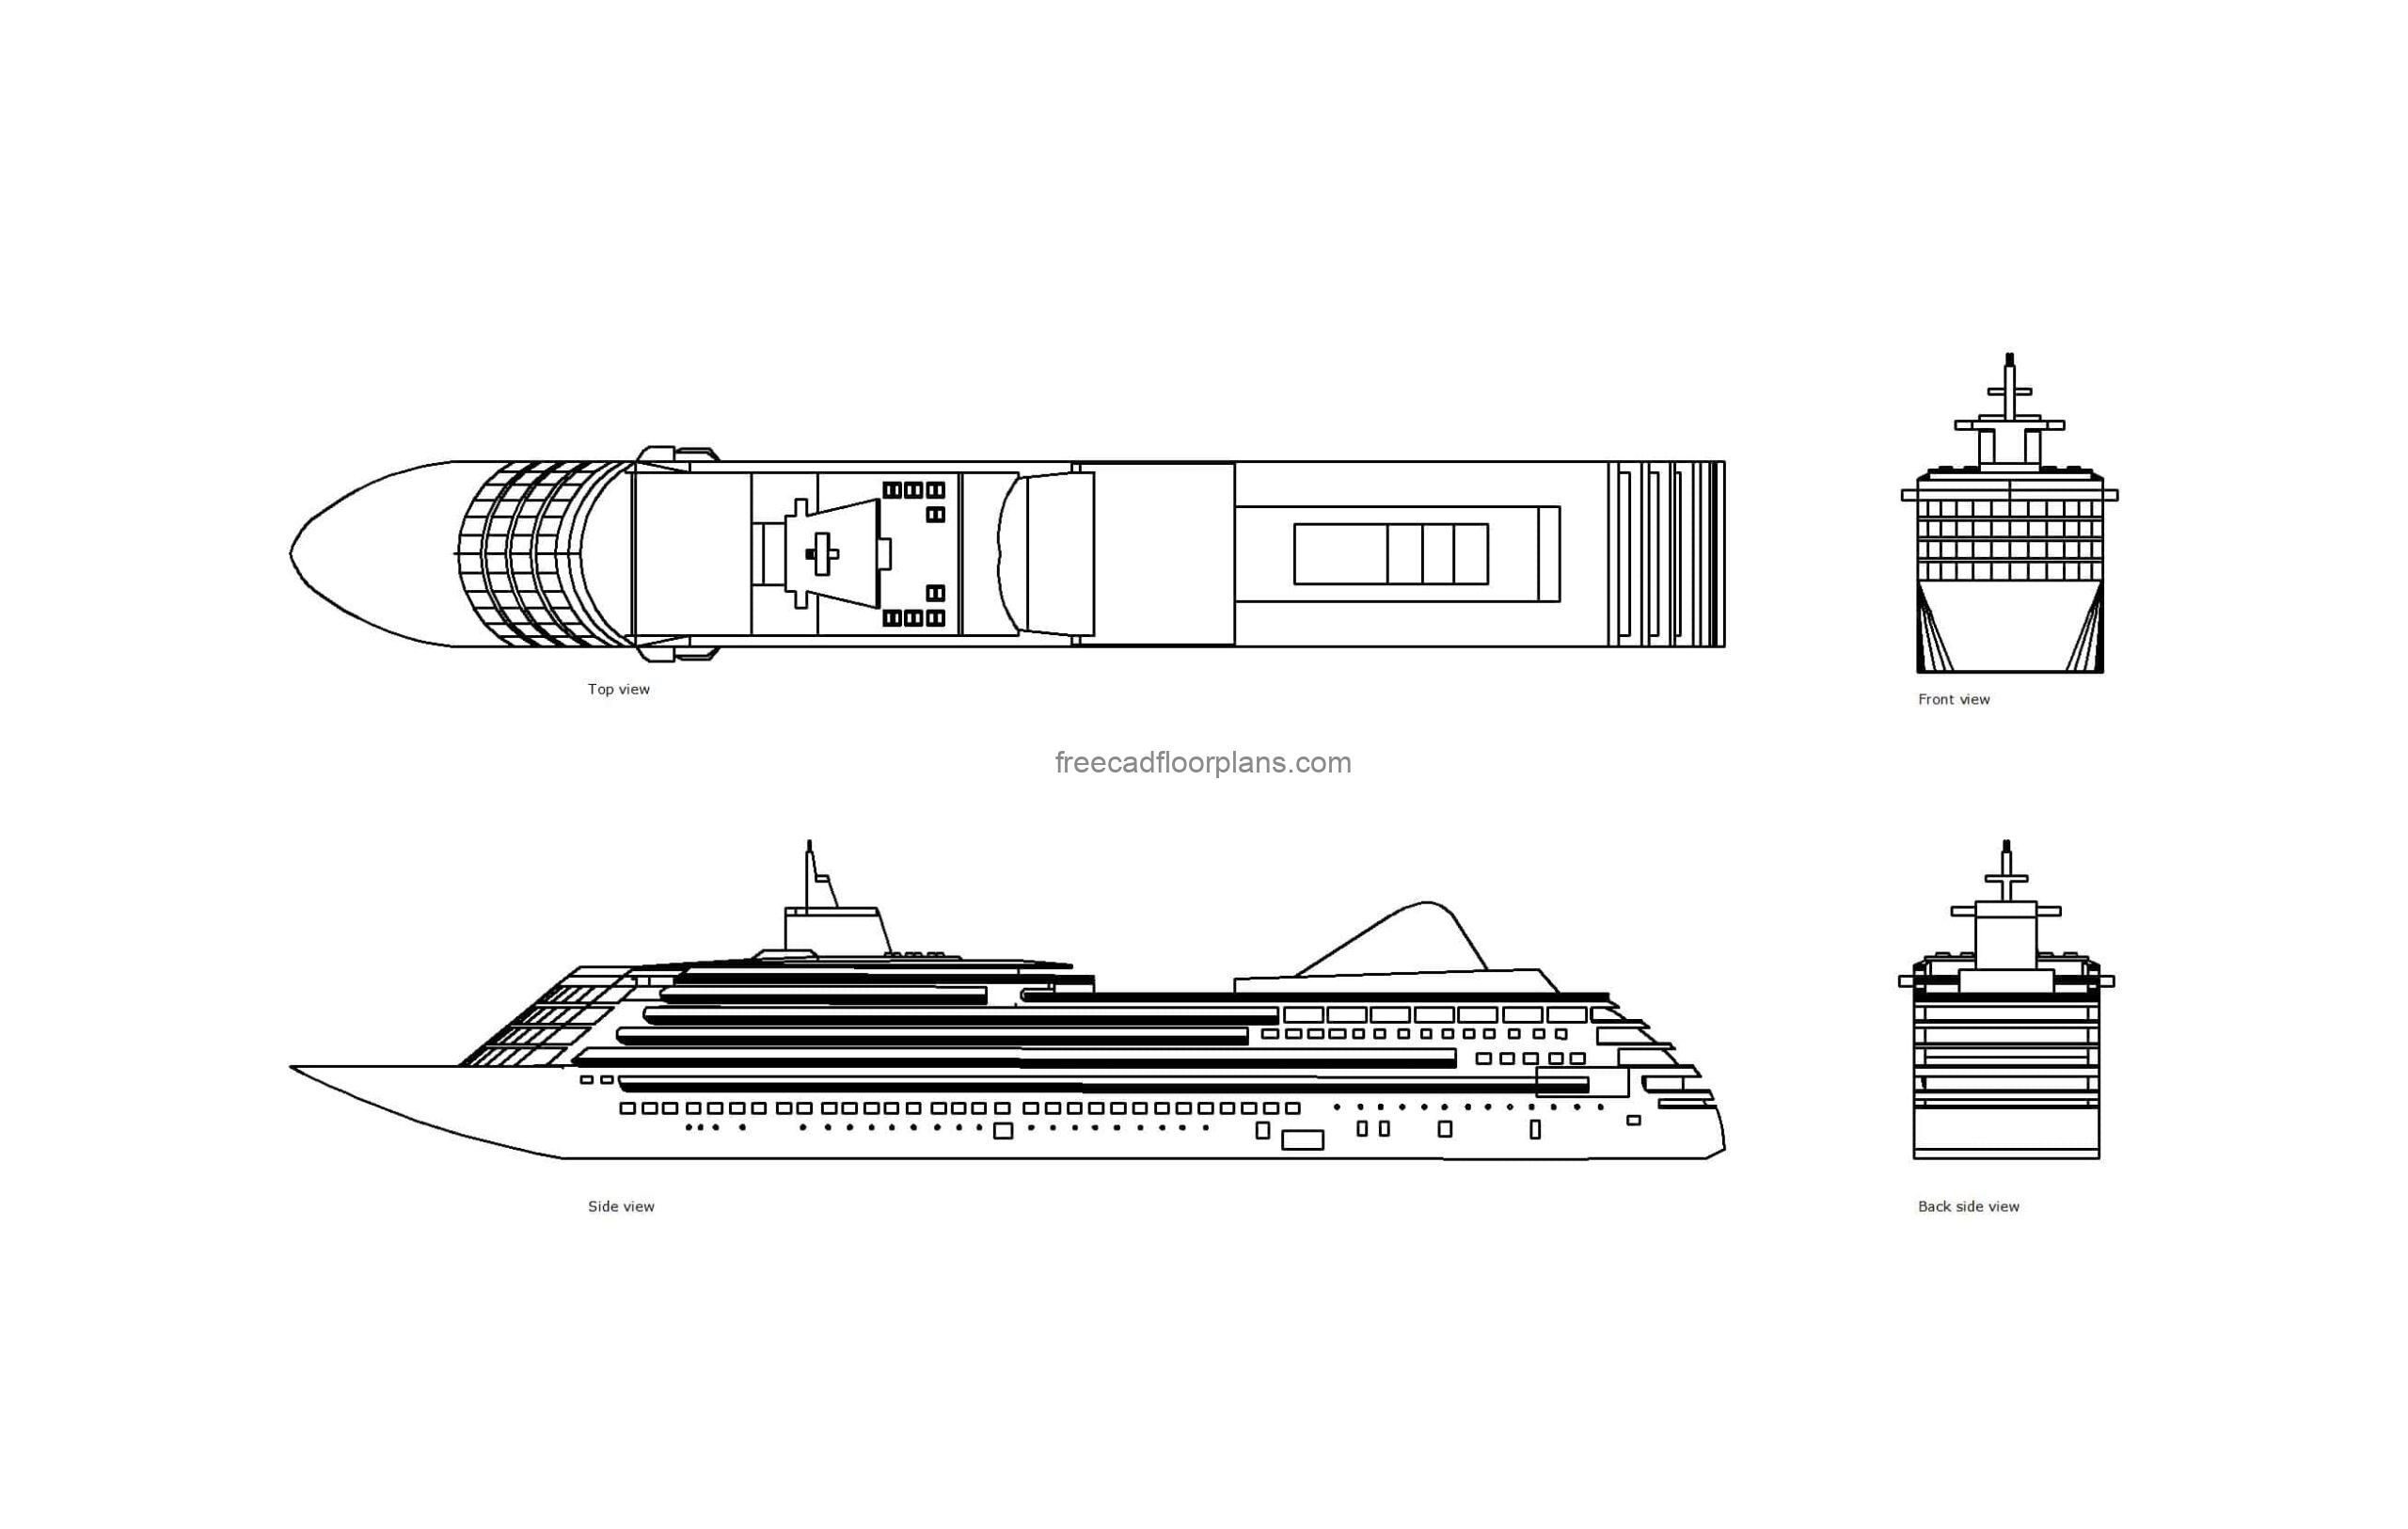 autocad drawing of a cruise ship, 2d plan and elevation views, dwg file free for download